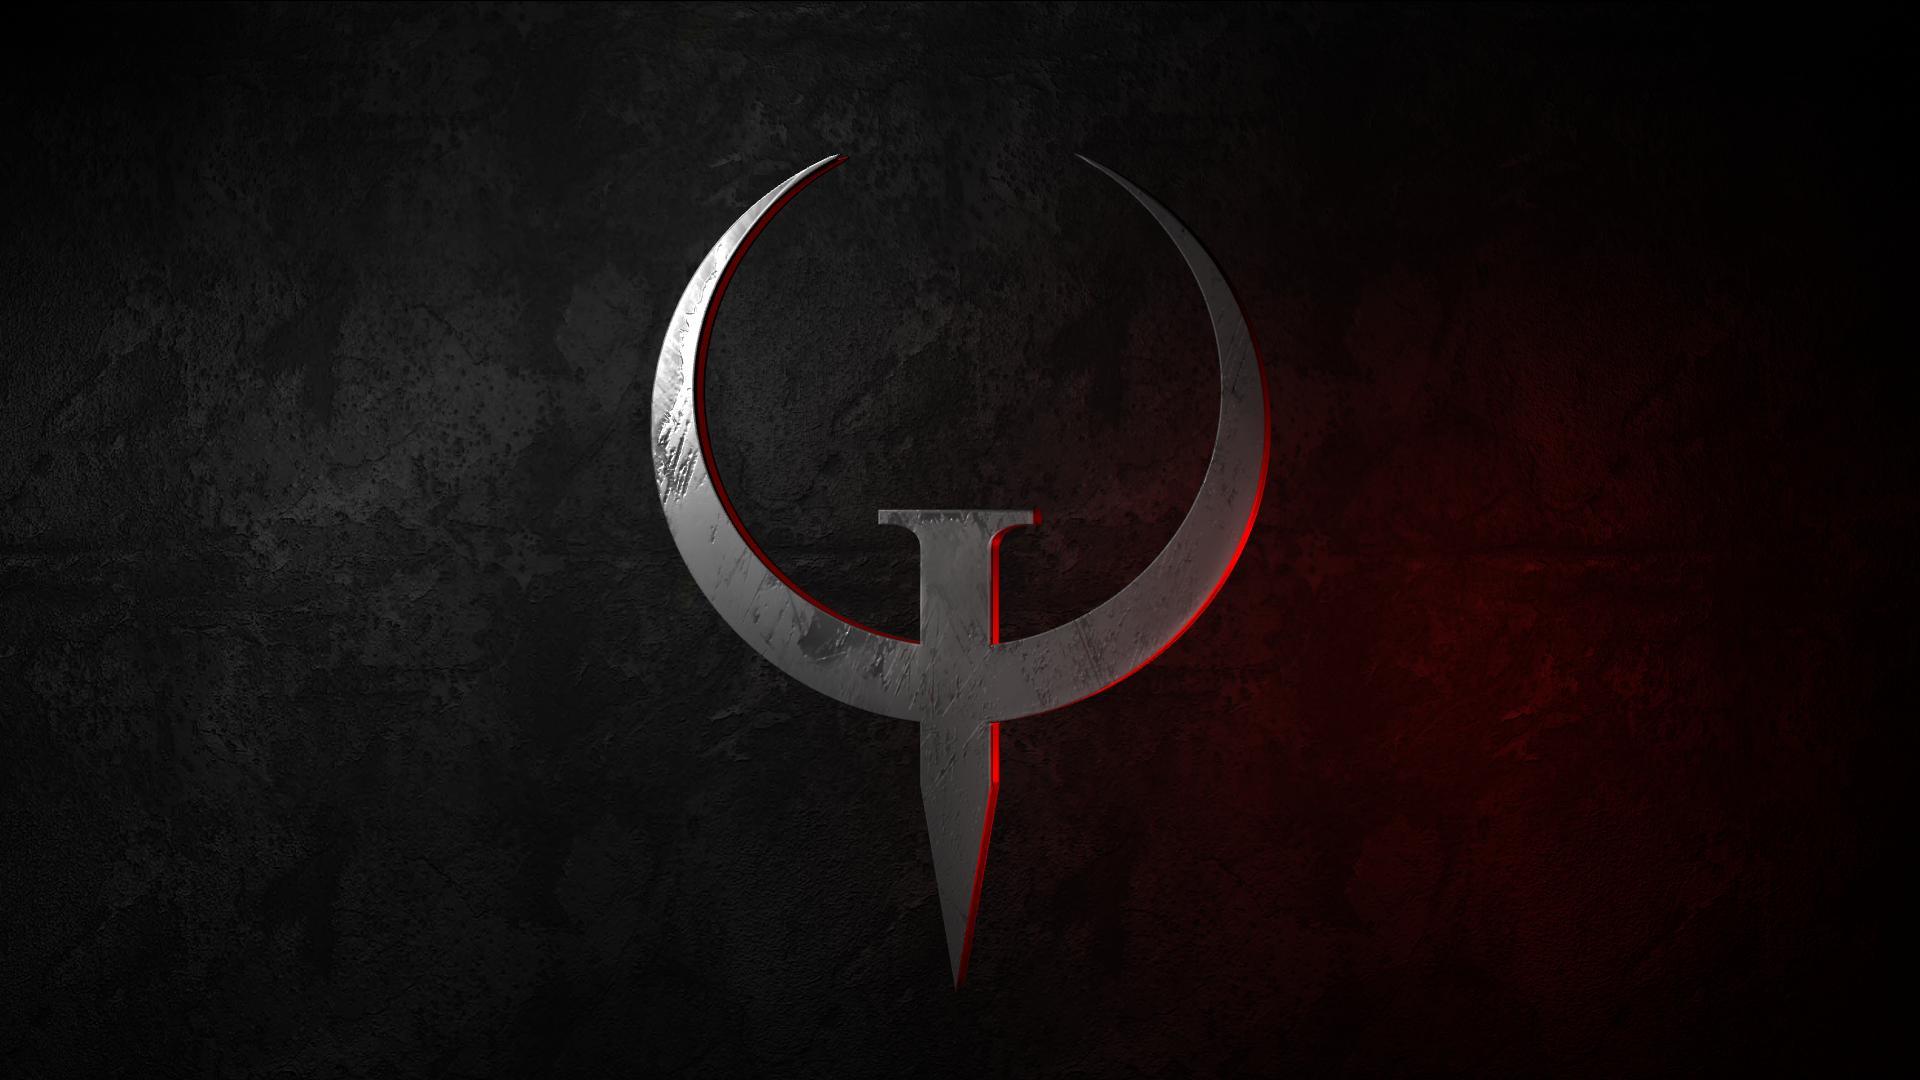 Basic Quake Champions wallpaper extracted from official site